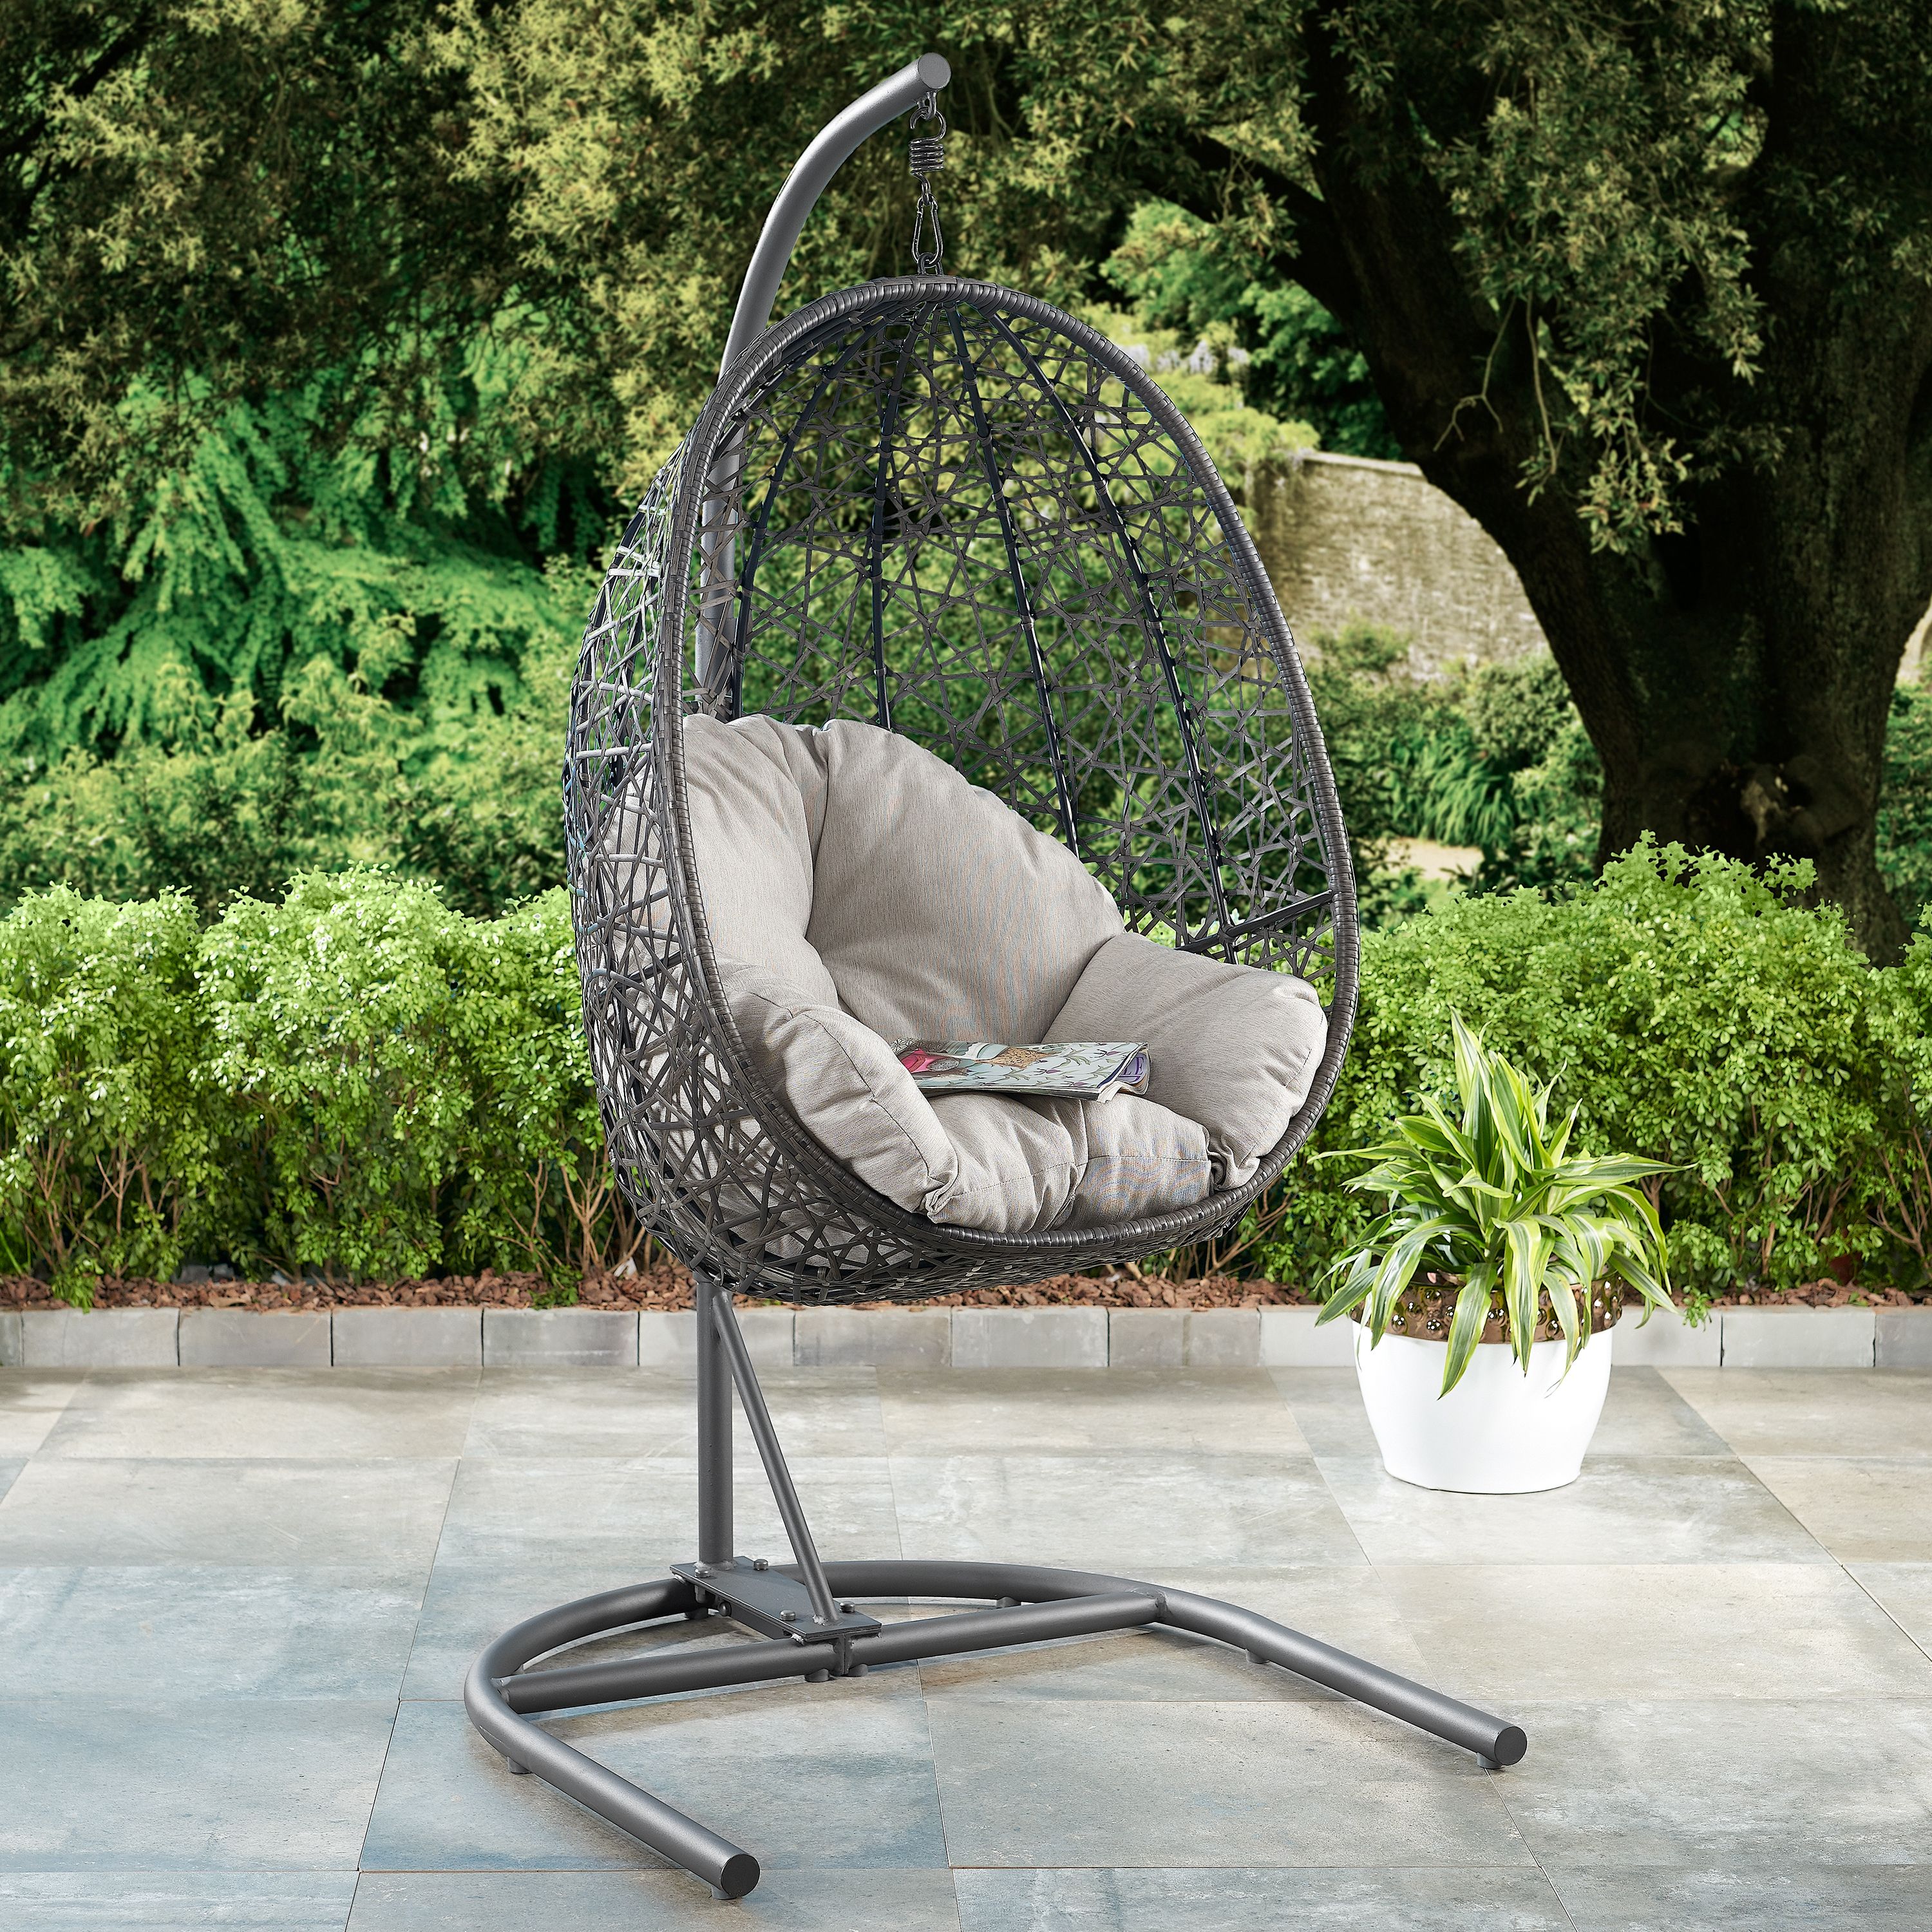 Better Homes & Gardens Outdoor Lantis Patio Wicker Hanging Egg Chair with Stand - Brown Wicker, Beige Cushion - image 4 of 5